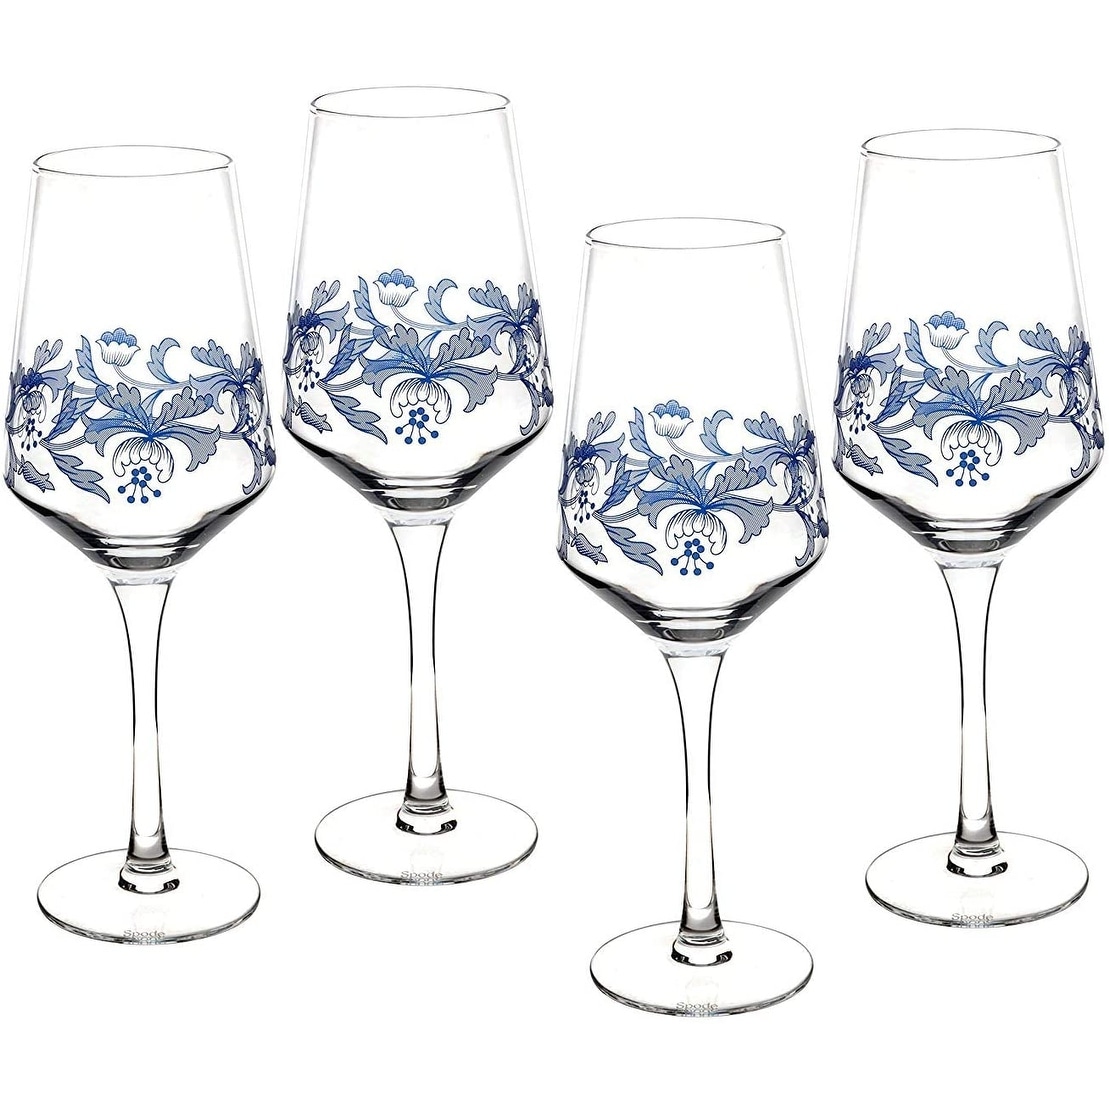 https://ak1.ostkcdn.com/images/products/is/images/direct/0dce512bacff0558e1030a5bfce402a24f328406/Spode-Blue-Italian-Wine-Glass-Set-of-4.jpg